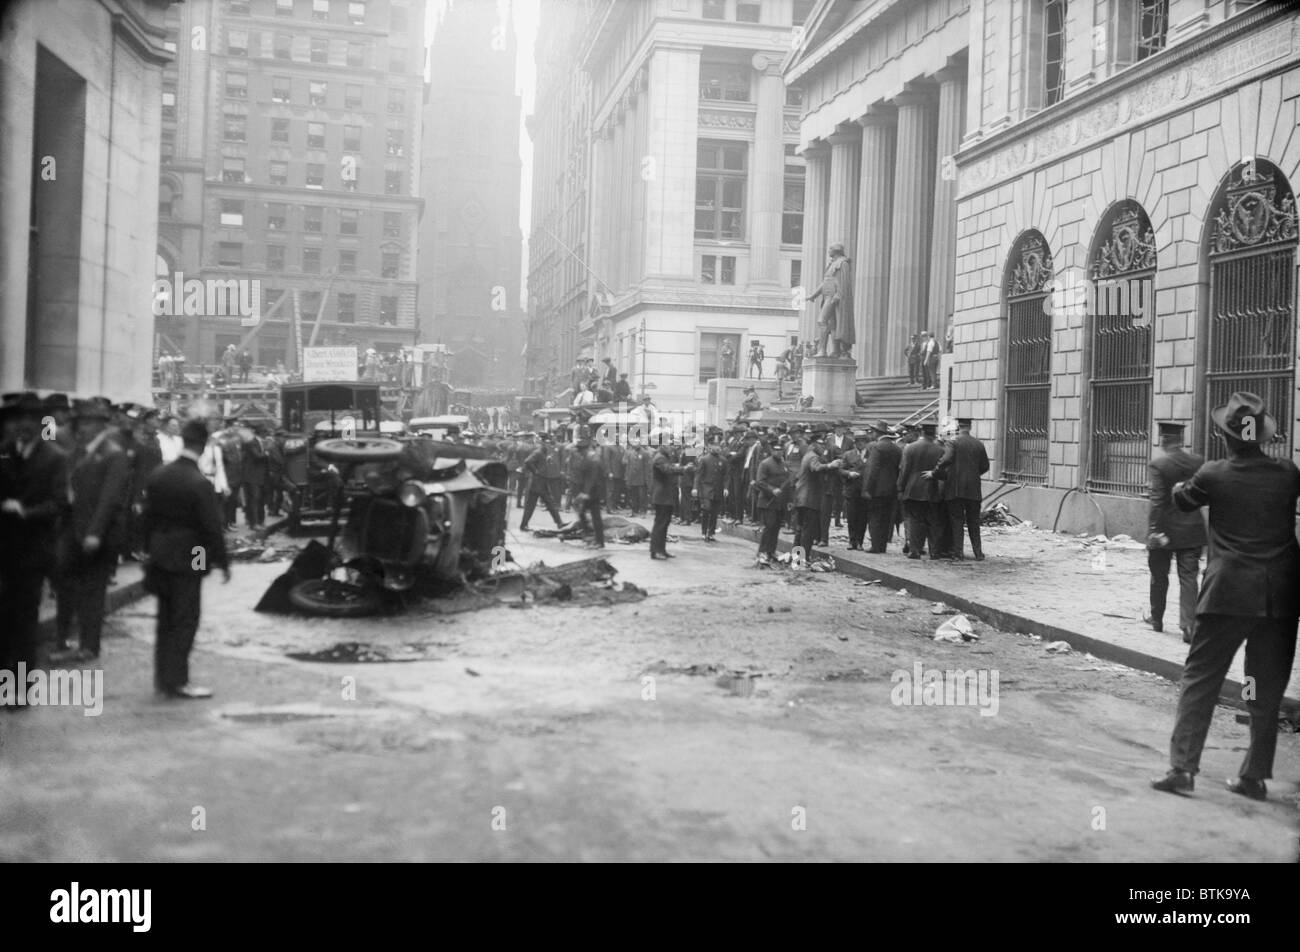 The Wall Street Bombing. Police, soldiers, and reporters at the scene of the Wall Street terrorist bombing, Sept. 16, 1920.The dead and injured people have been removed, leaving wrecked cars and a dead horse on Wall Street. Stock Photo